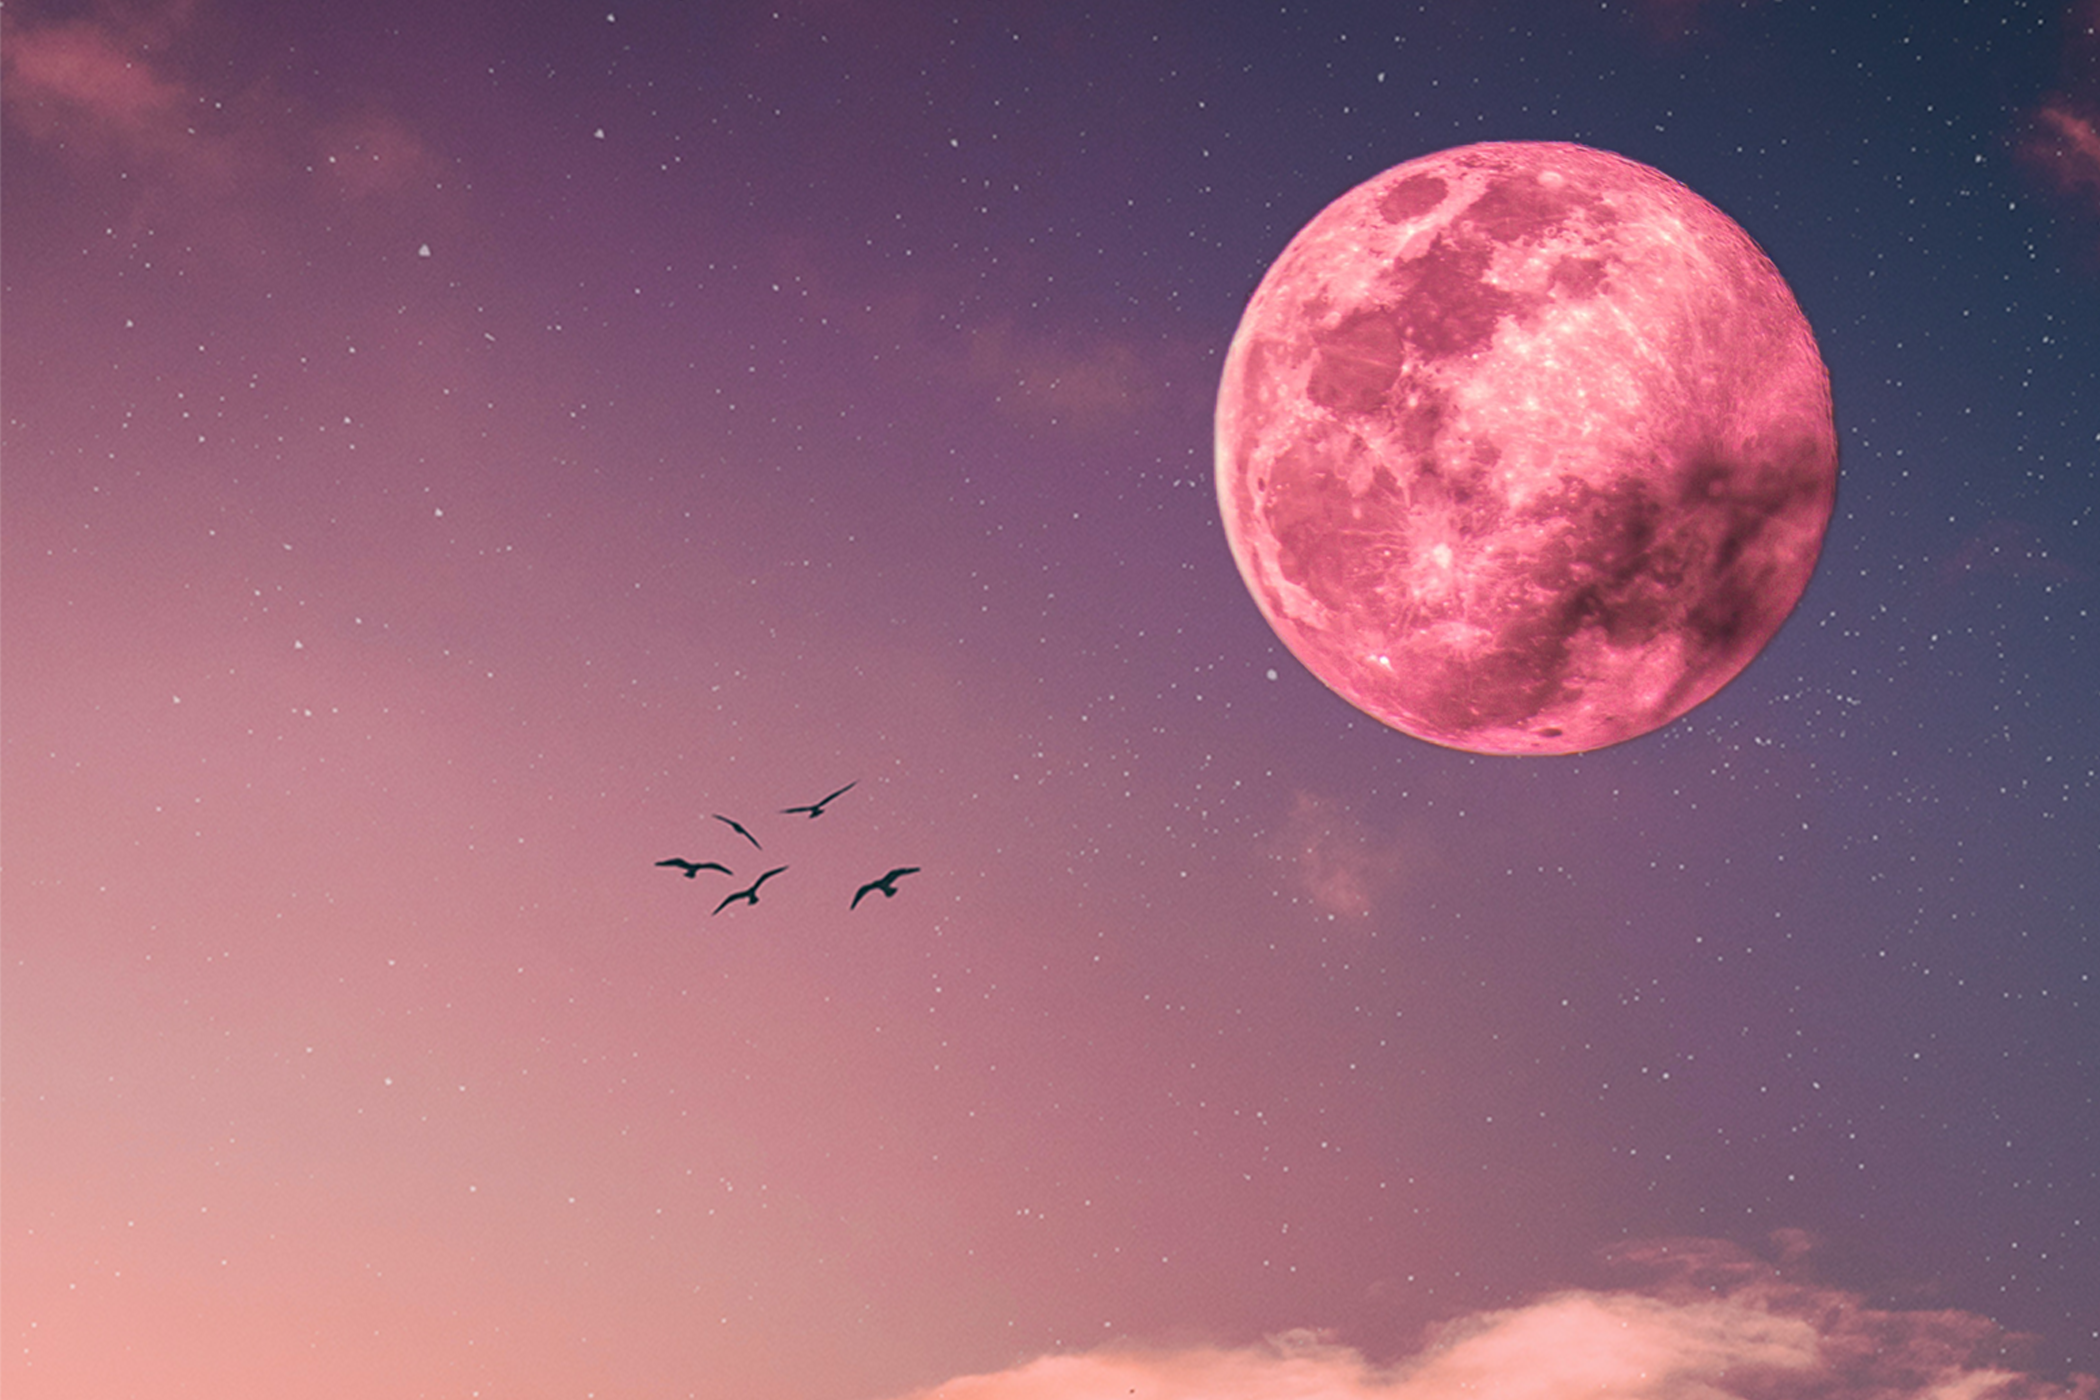 Pink full moon in light pink and purple night sky with birds flying across the stars.